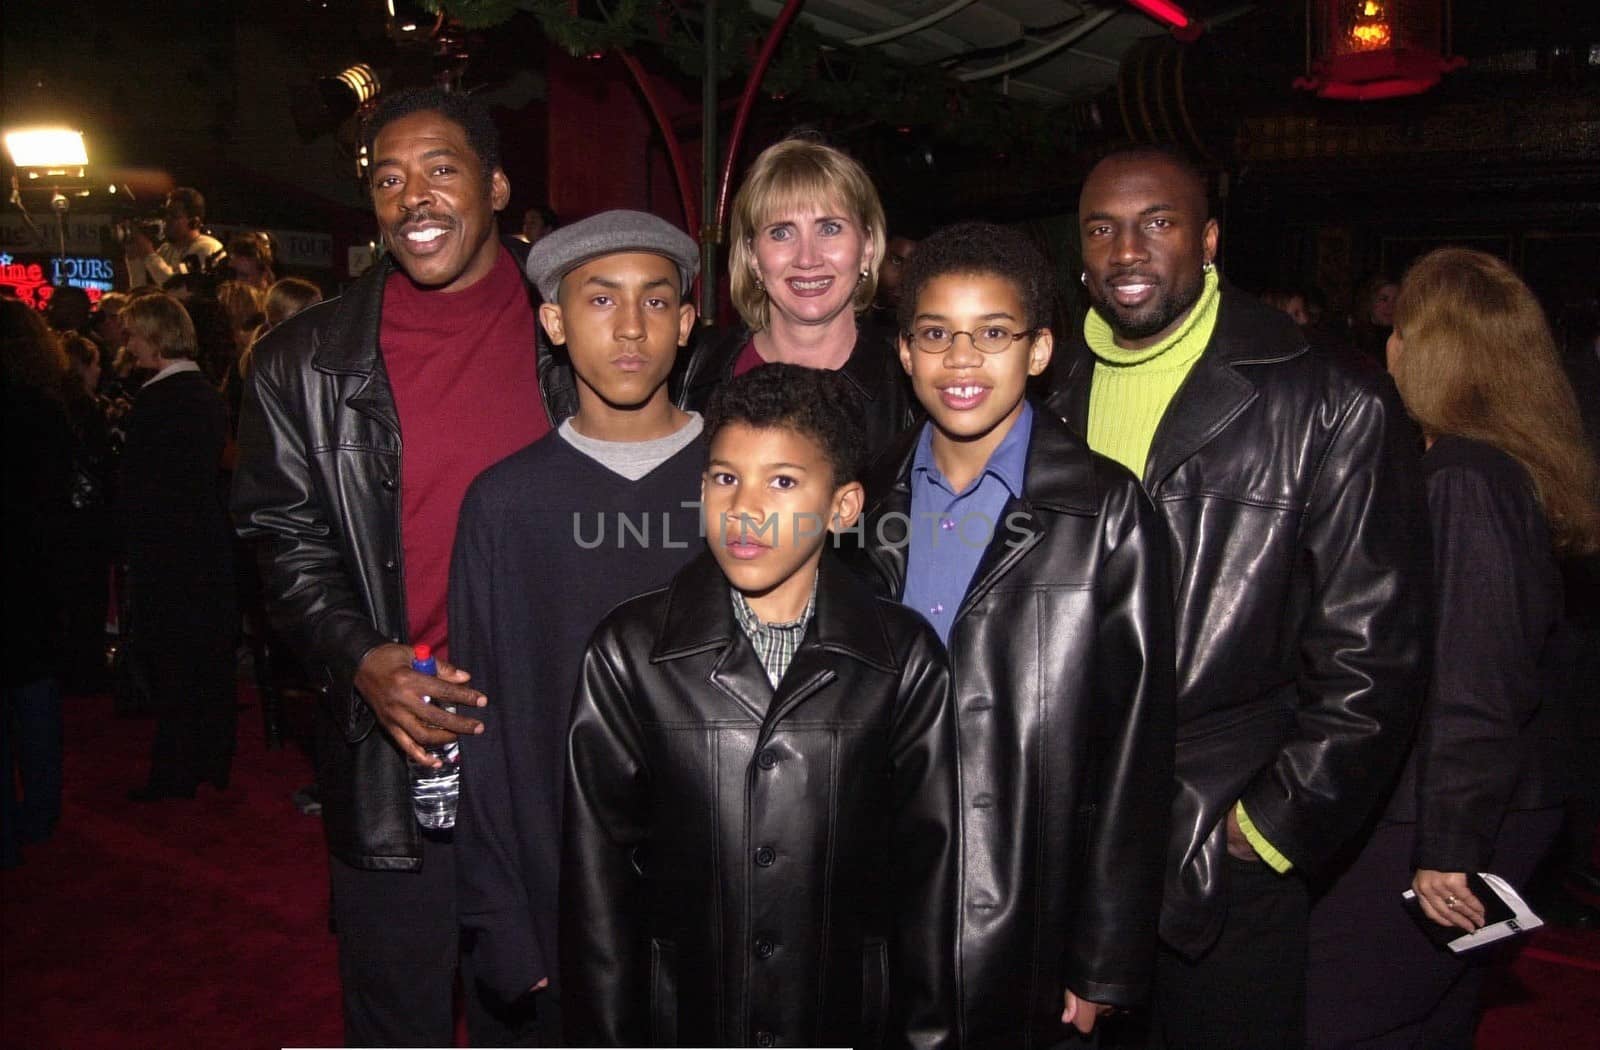 Ernie Hudson and family at the premiere of Warner Brother's "Miss Congeniality" in Hollywood, 12-14-00